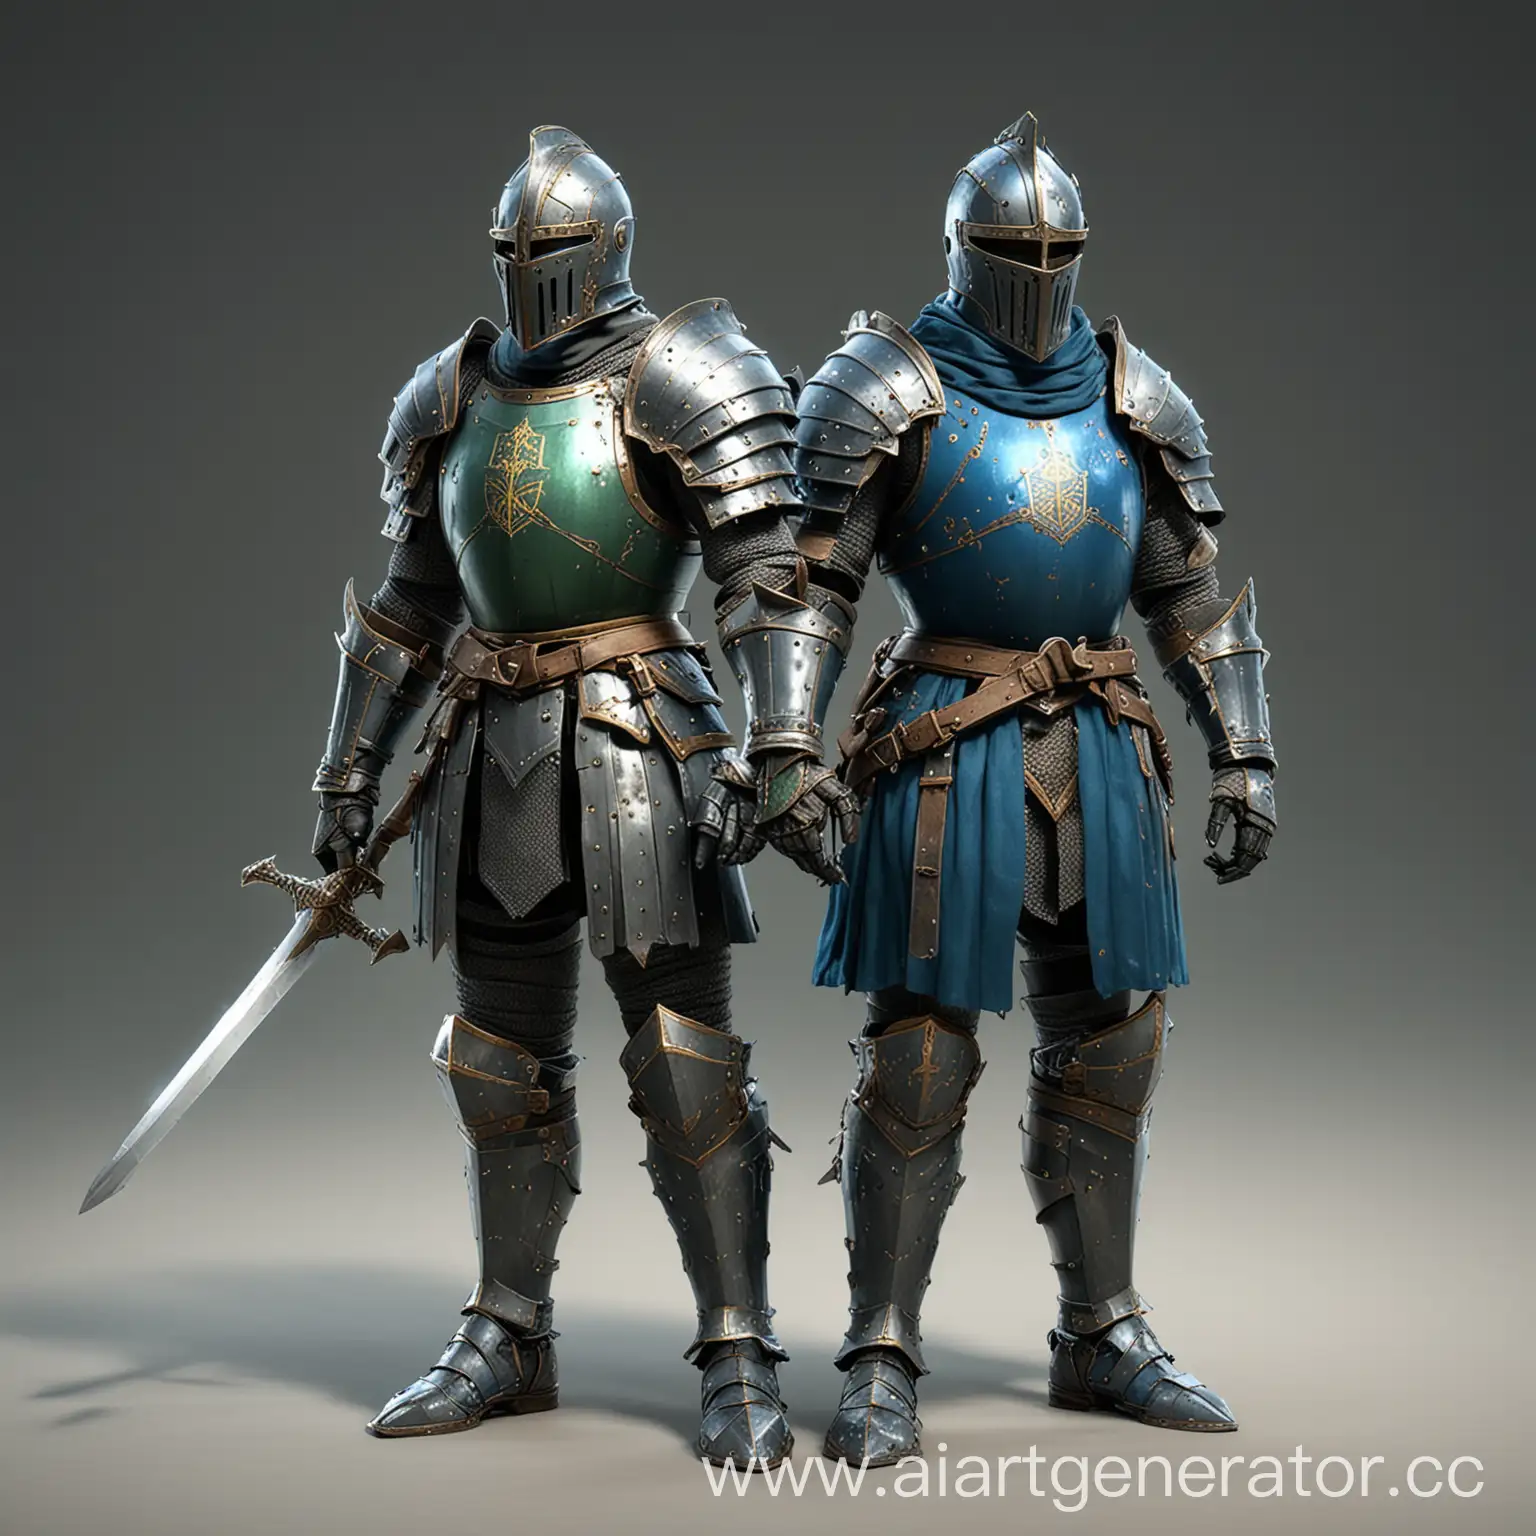 Two-Knights-in-Green-and-Blue-Armor-Facing-Each-Other